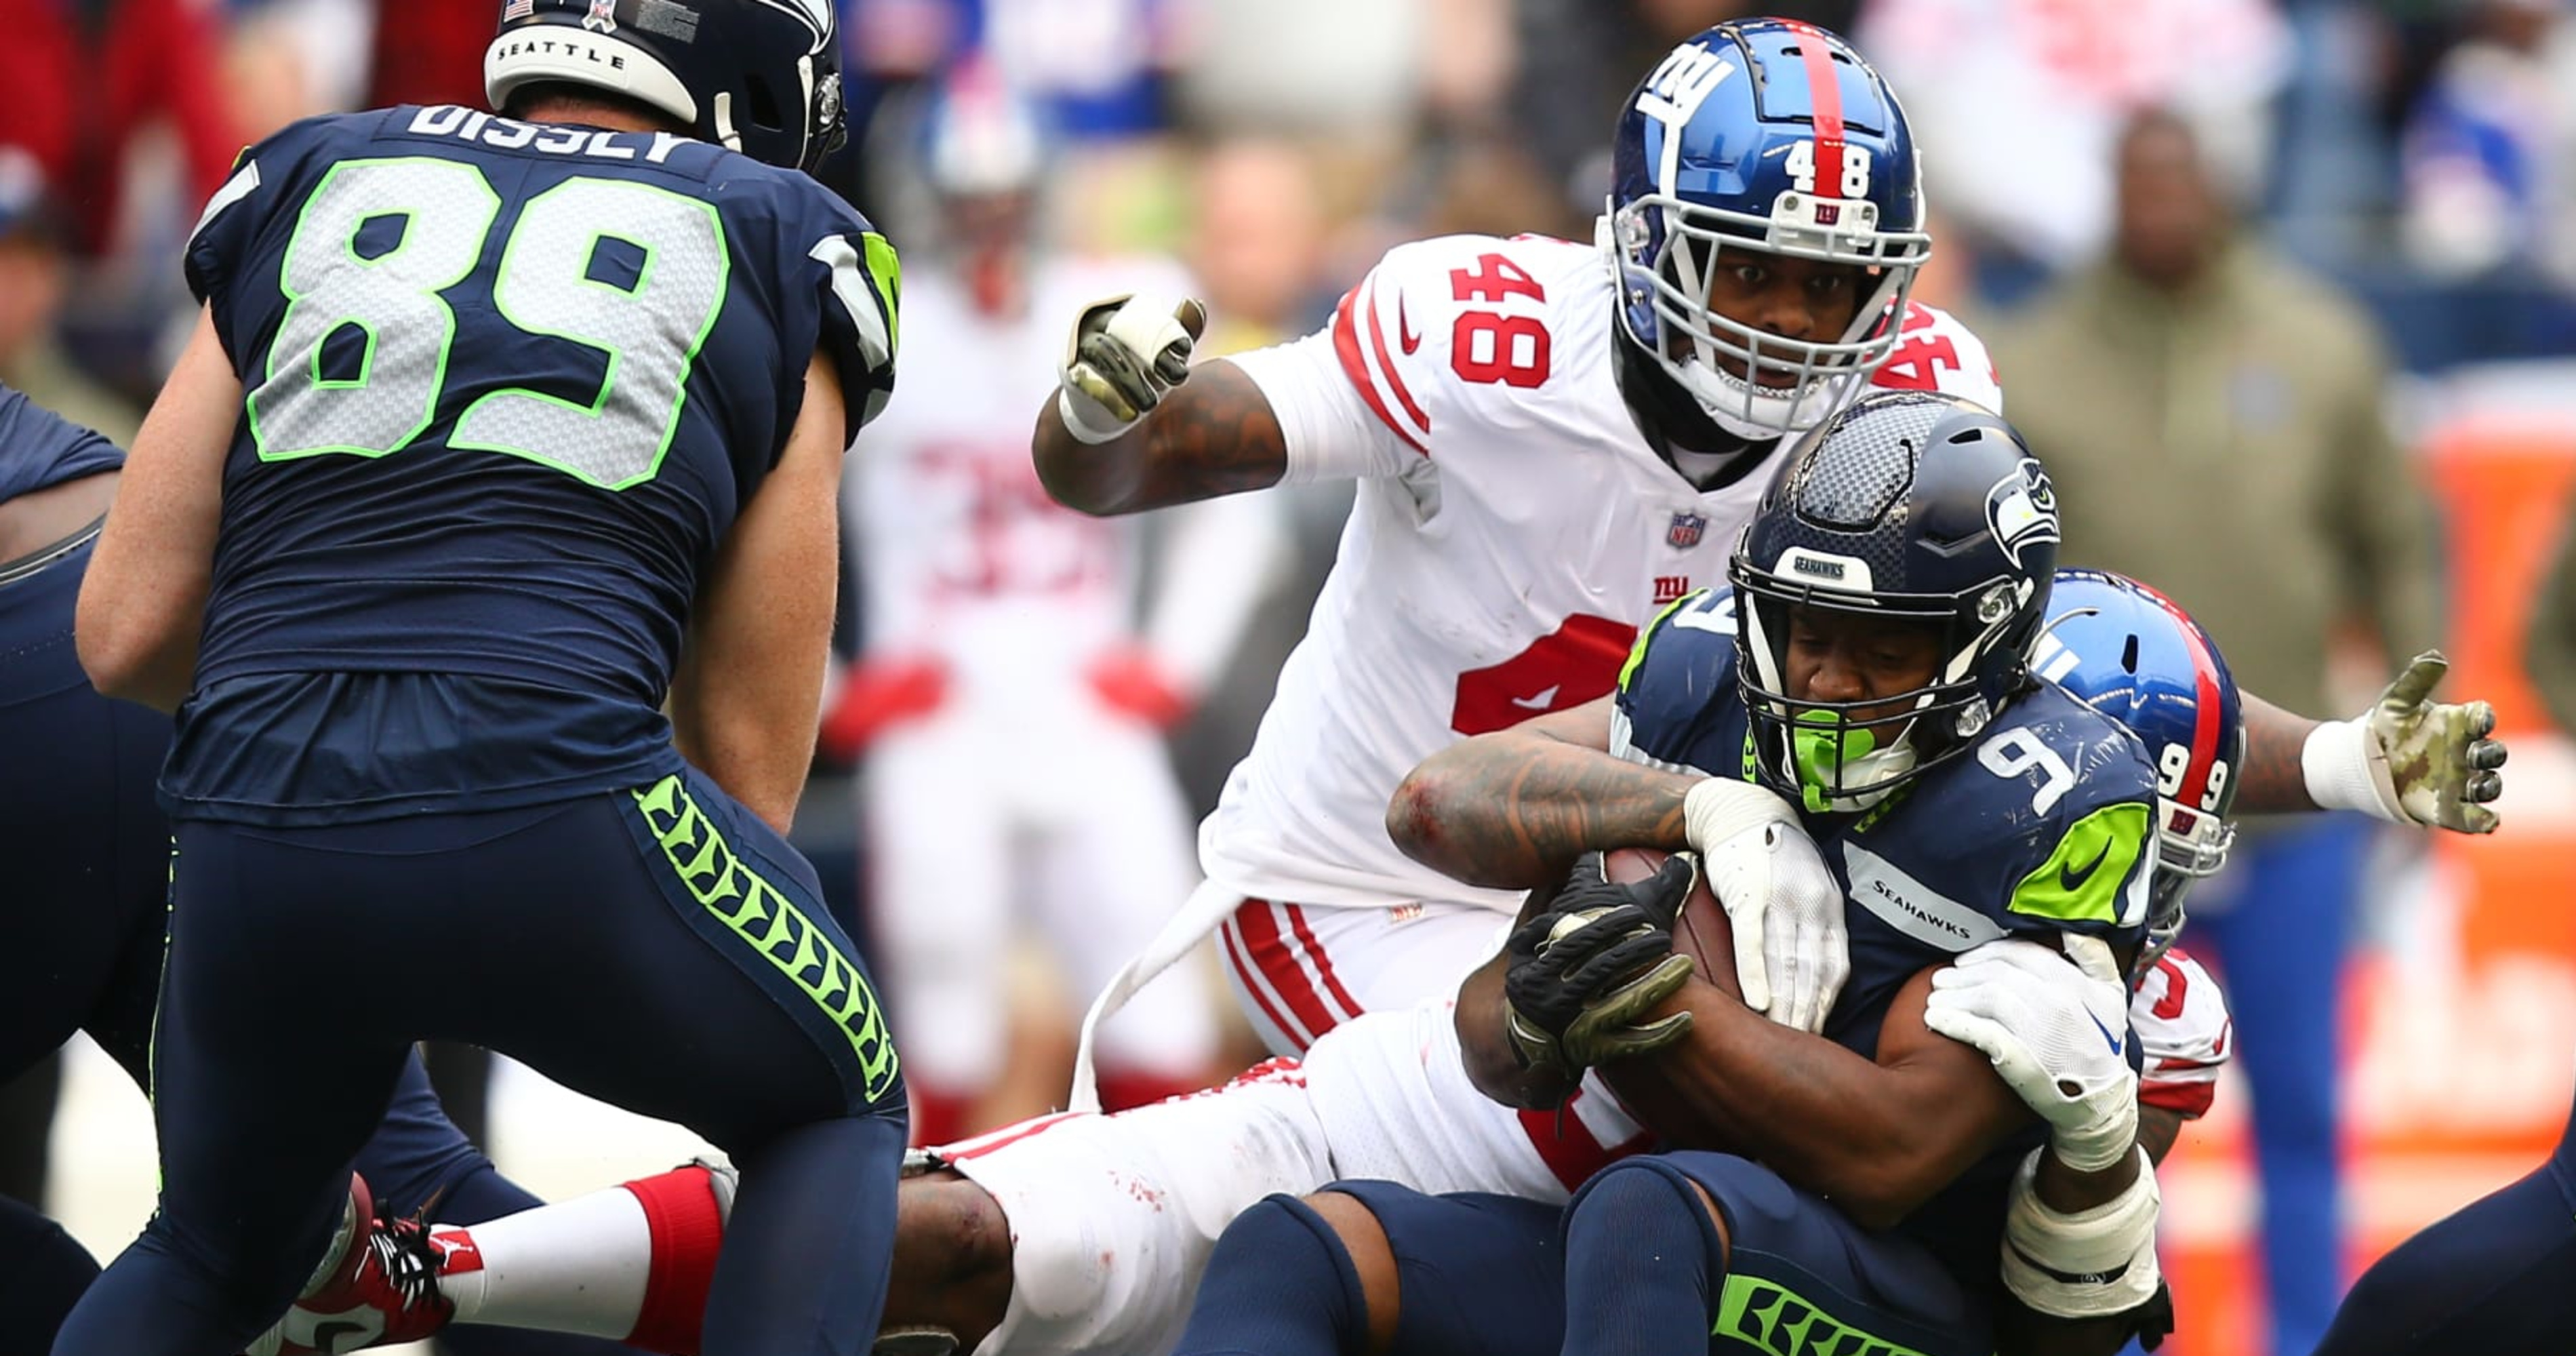 Seahawks vs. Giants: Updated Odds, Money Line, Spread, Props to